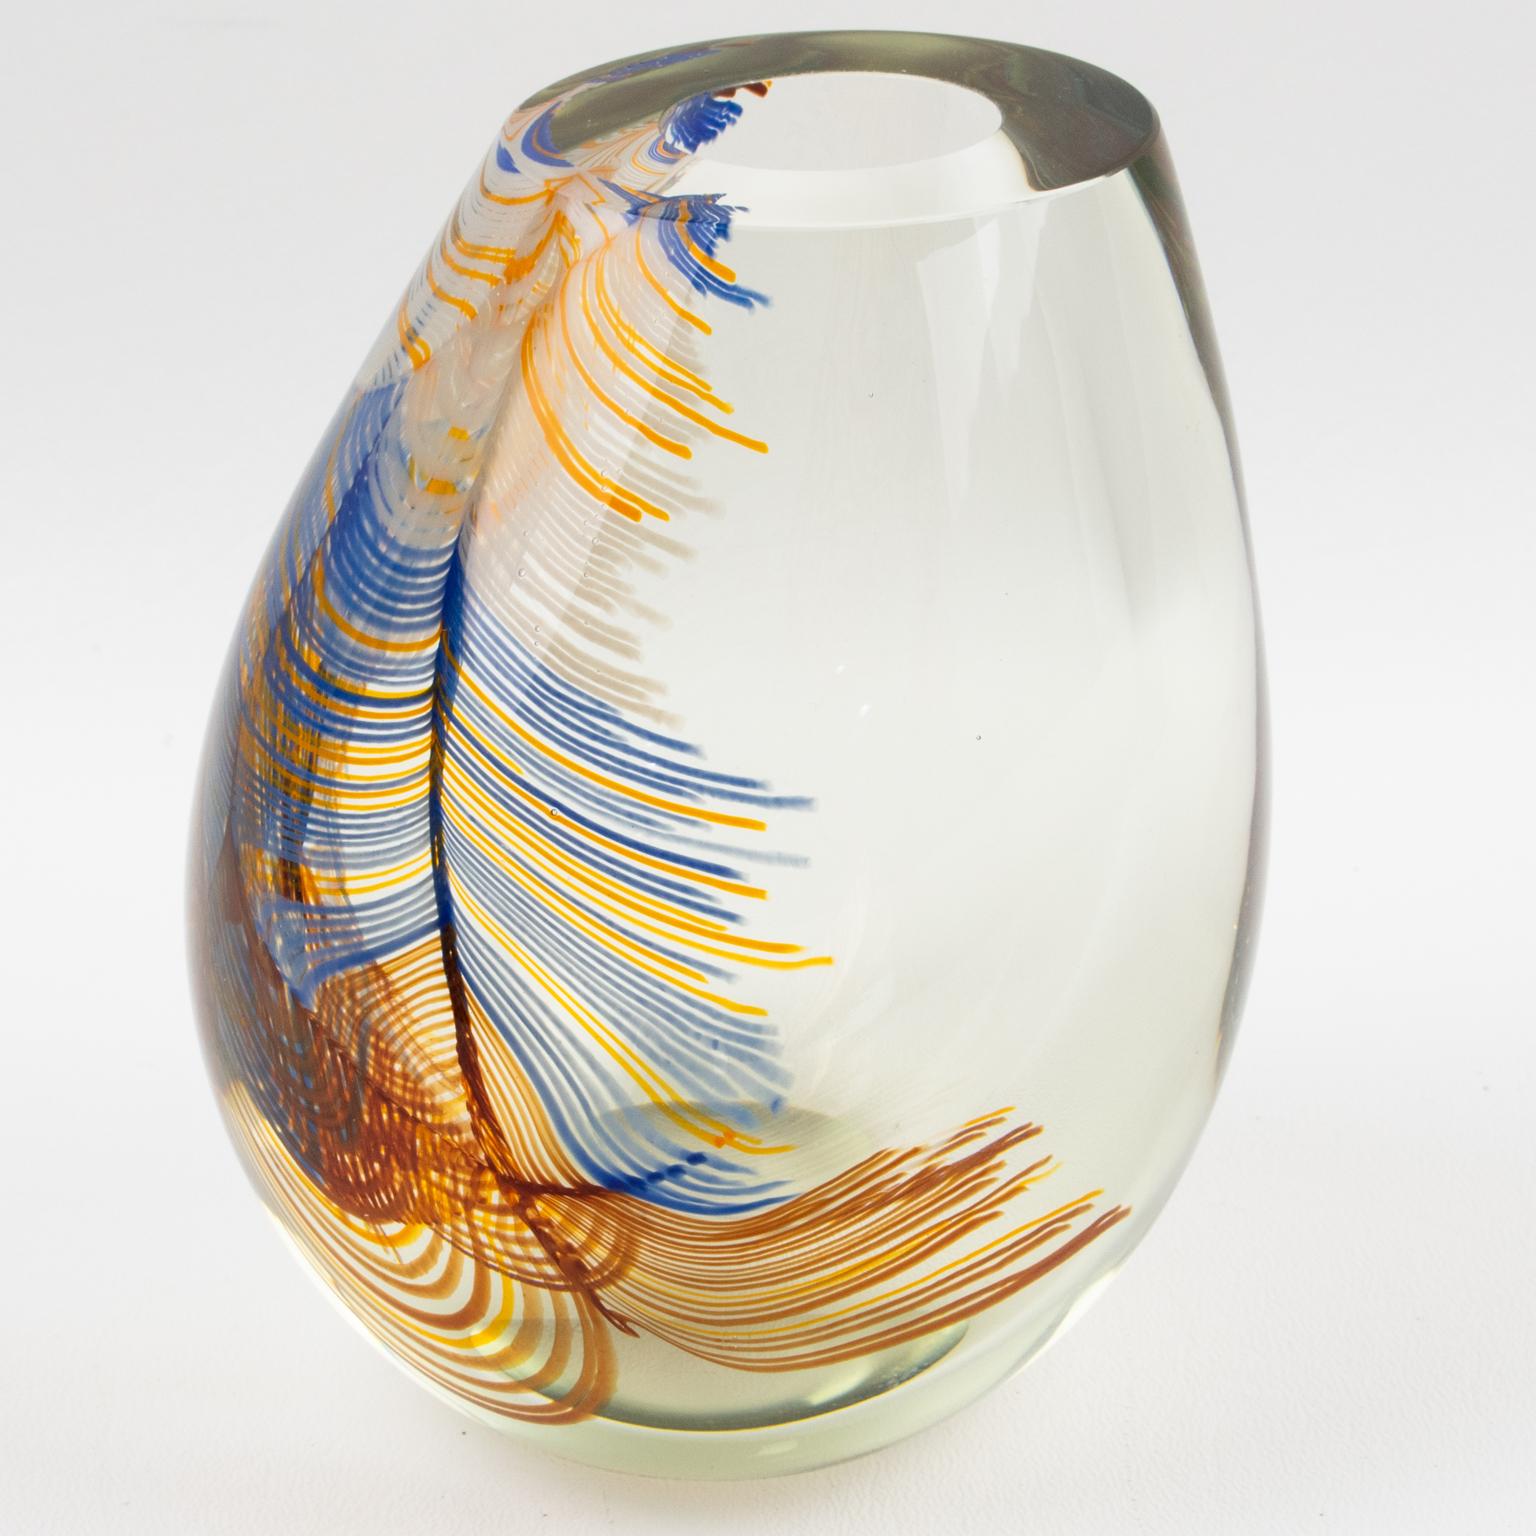 Fascinating Stephen Smyers, California 1979 modern art glass hand-blown vase. This beautiful handmade glass is unique compared to anything created in his studio.
This vase features a hollow and elegant bulbous sculptural form crafted from clear